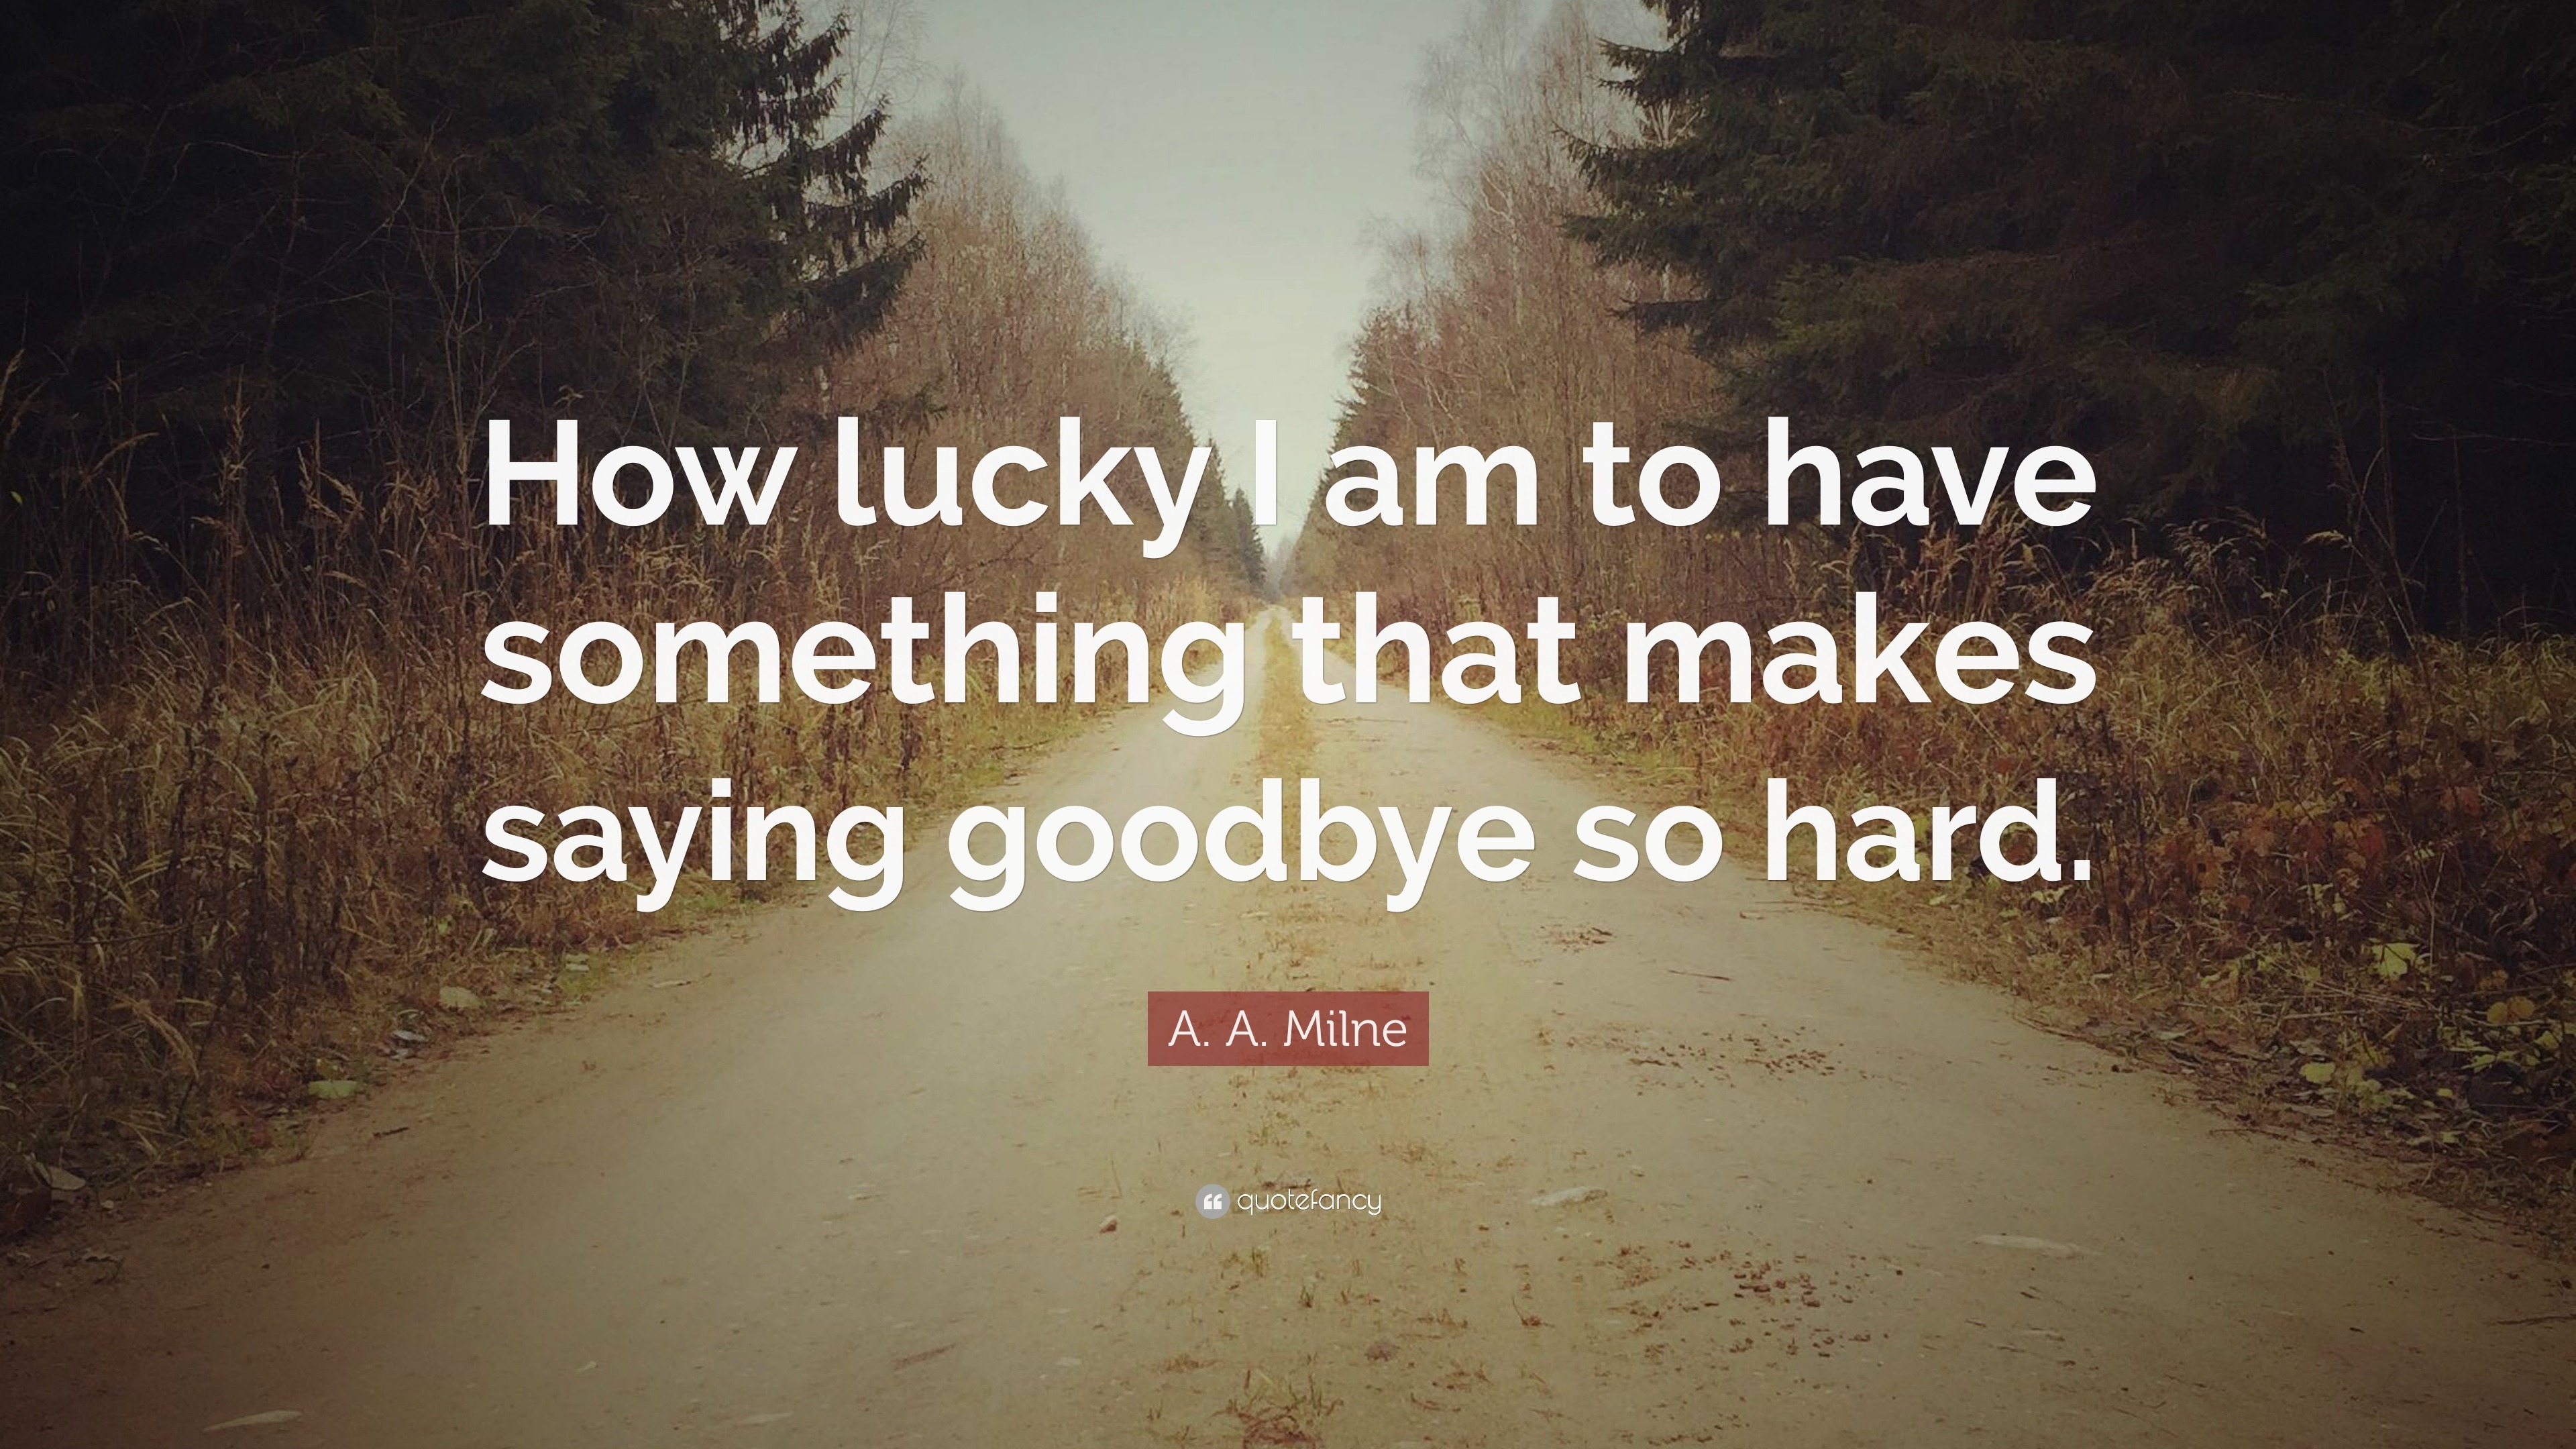 Goodbye Quotes (40 wallpapers) - Quotefancy